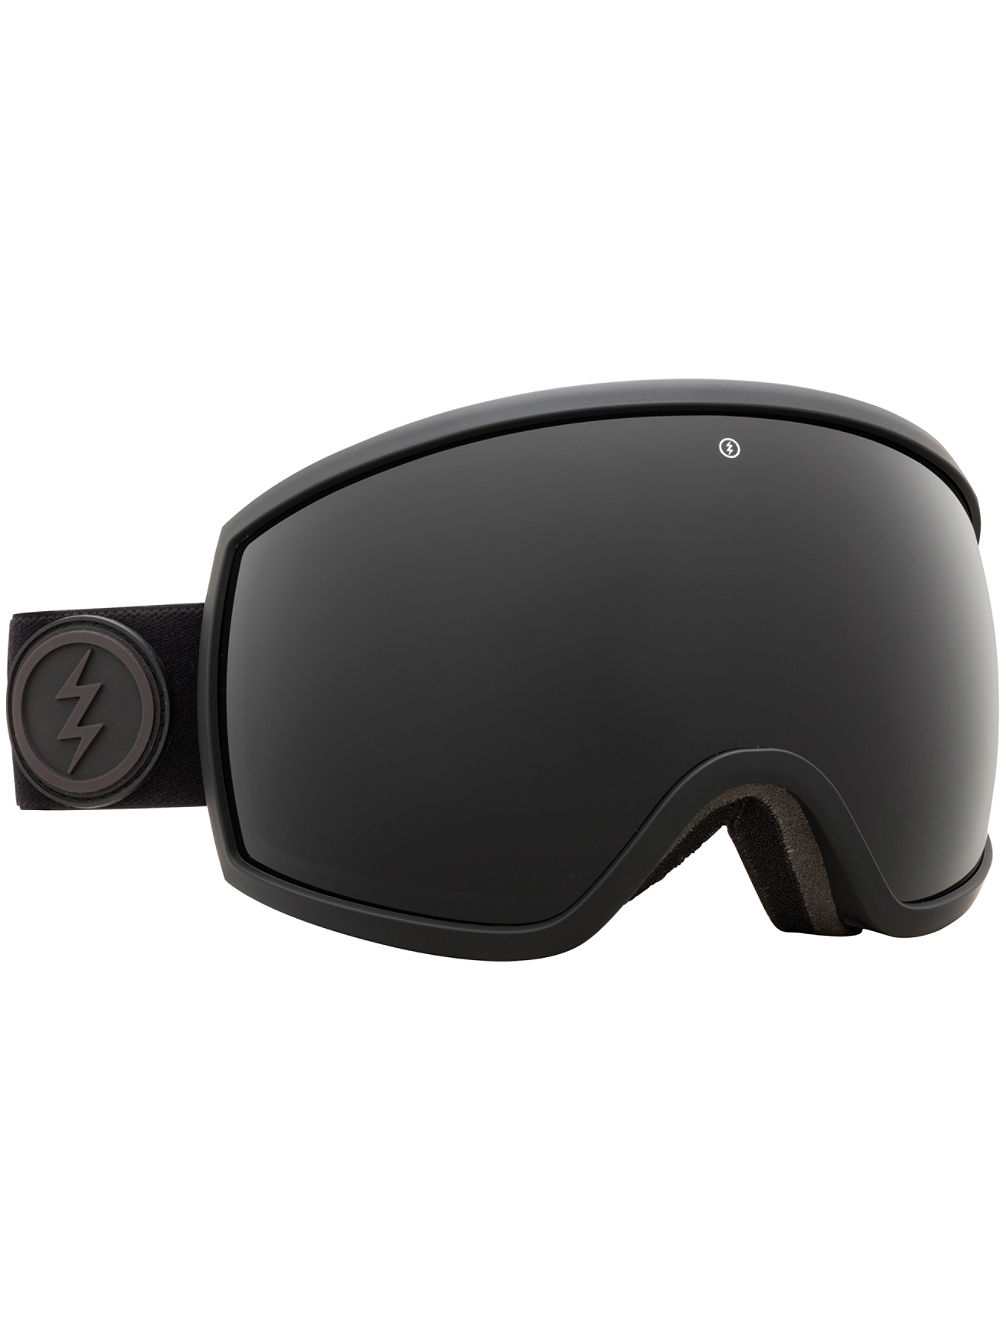 EG2-T Murked Goggle